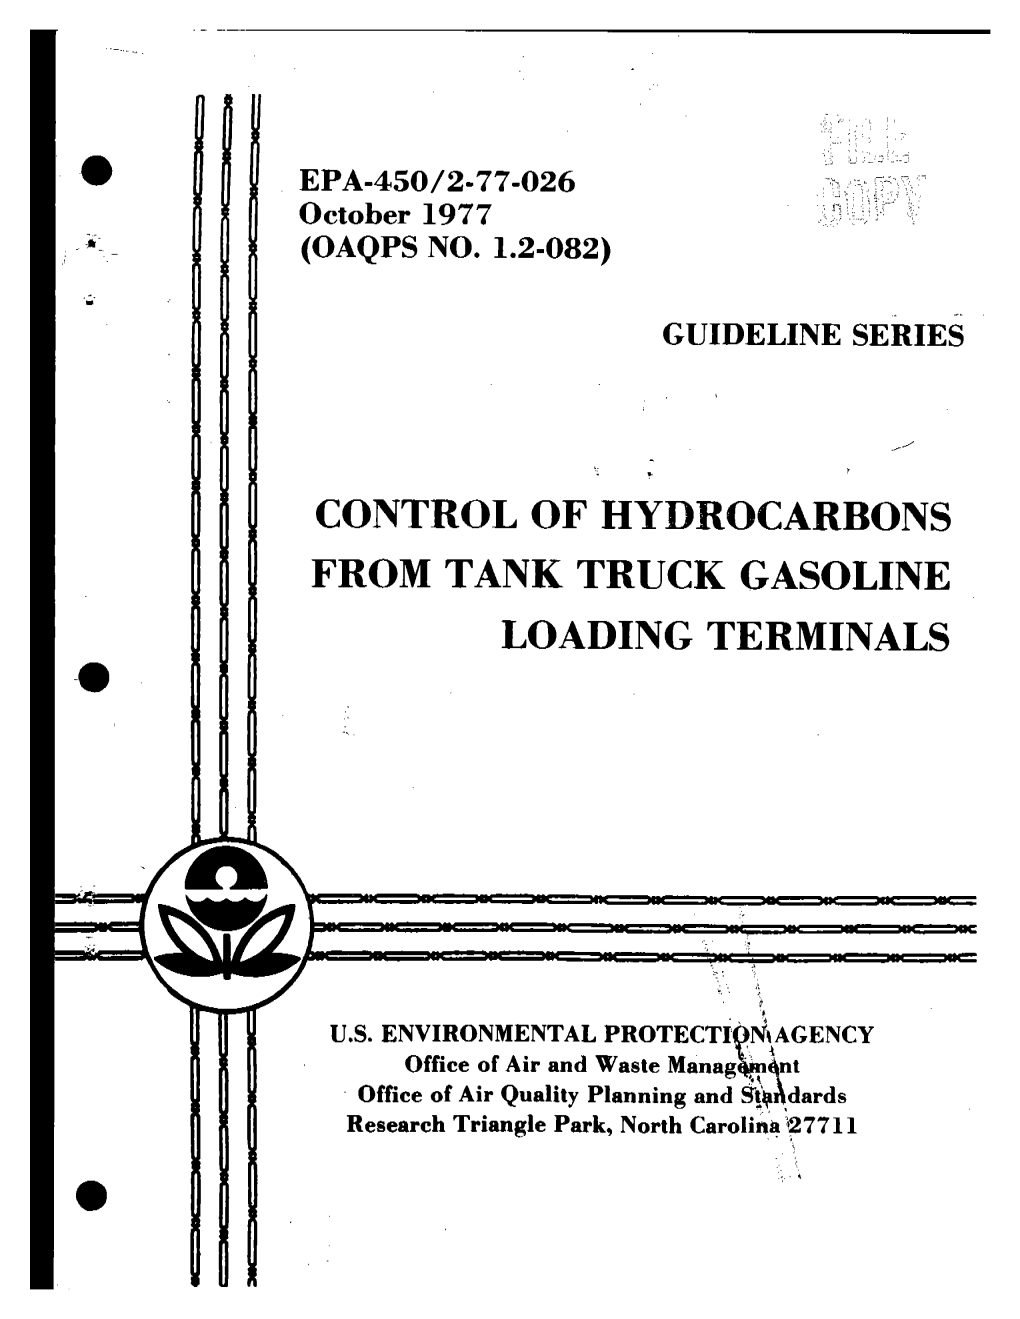 Control of Hydrocarbons from Tank Truck Gasoline Loading Terminals